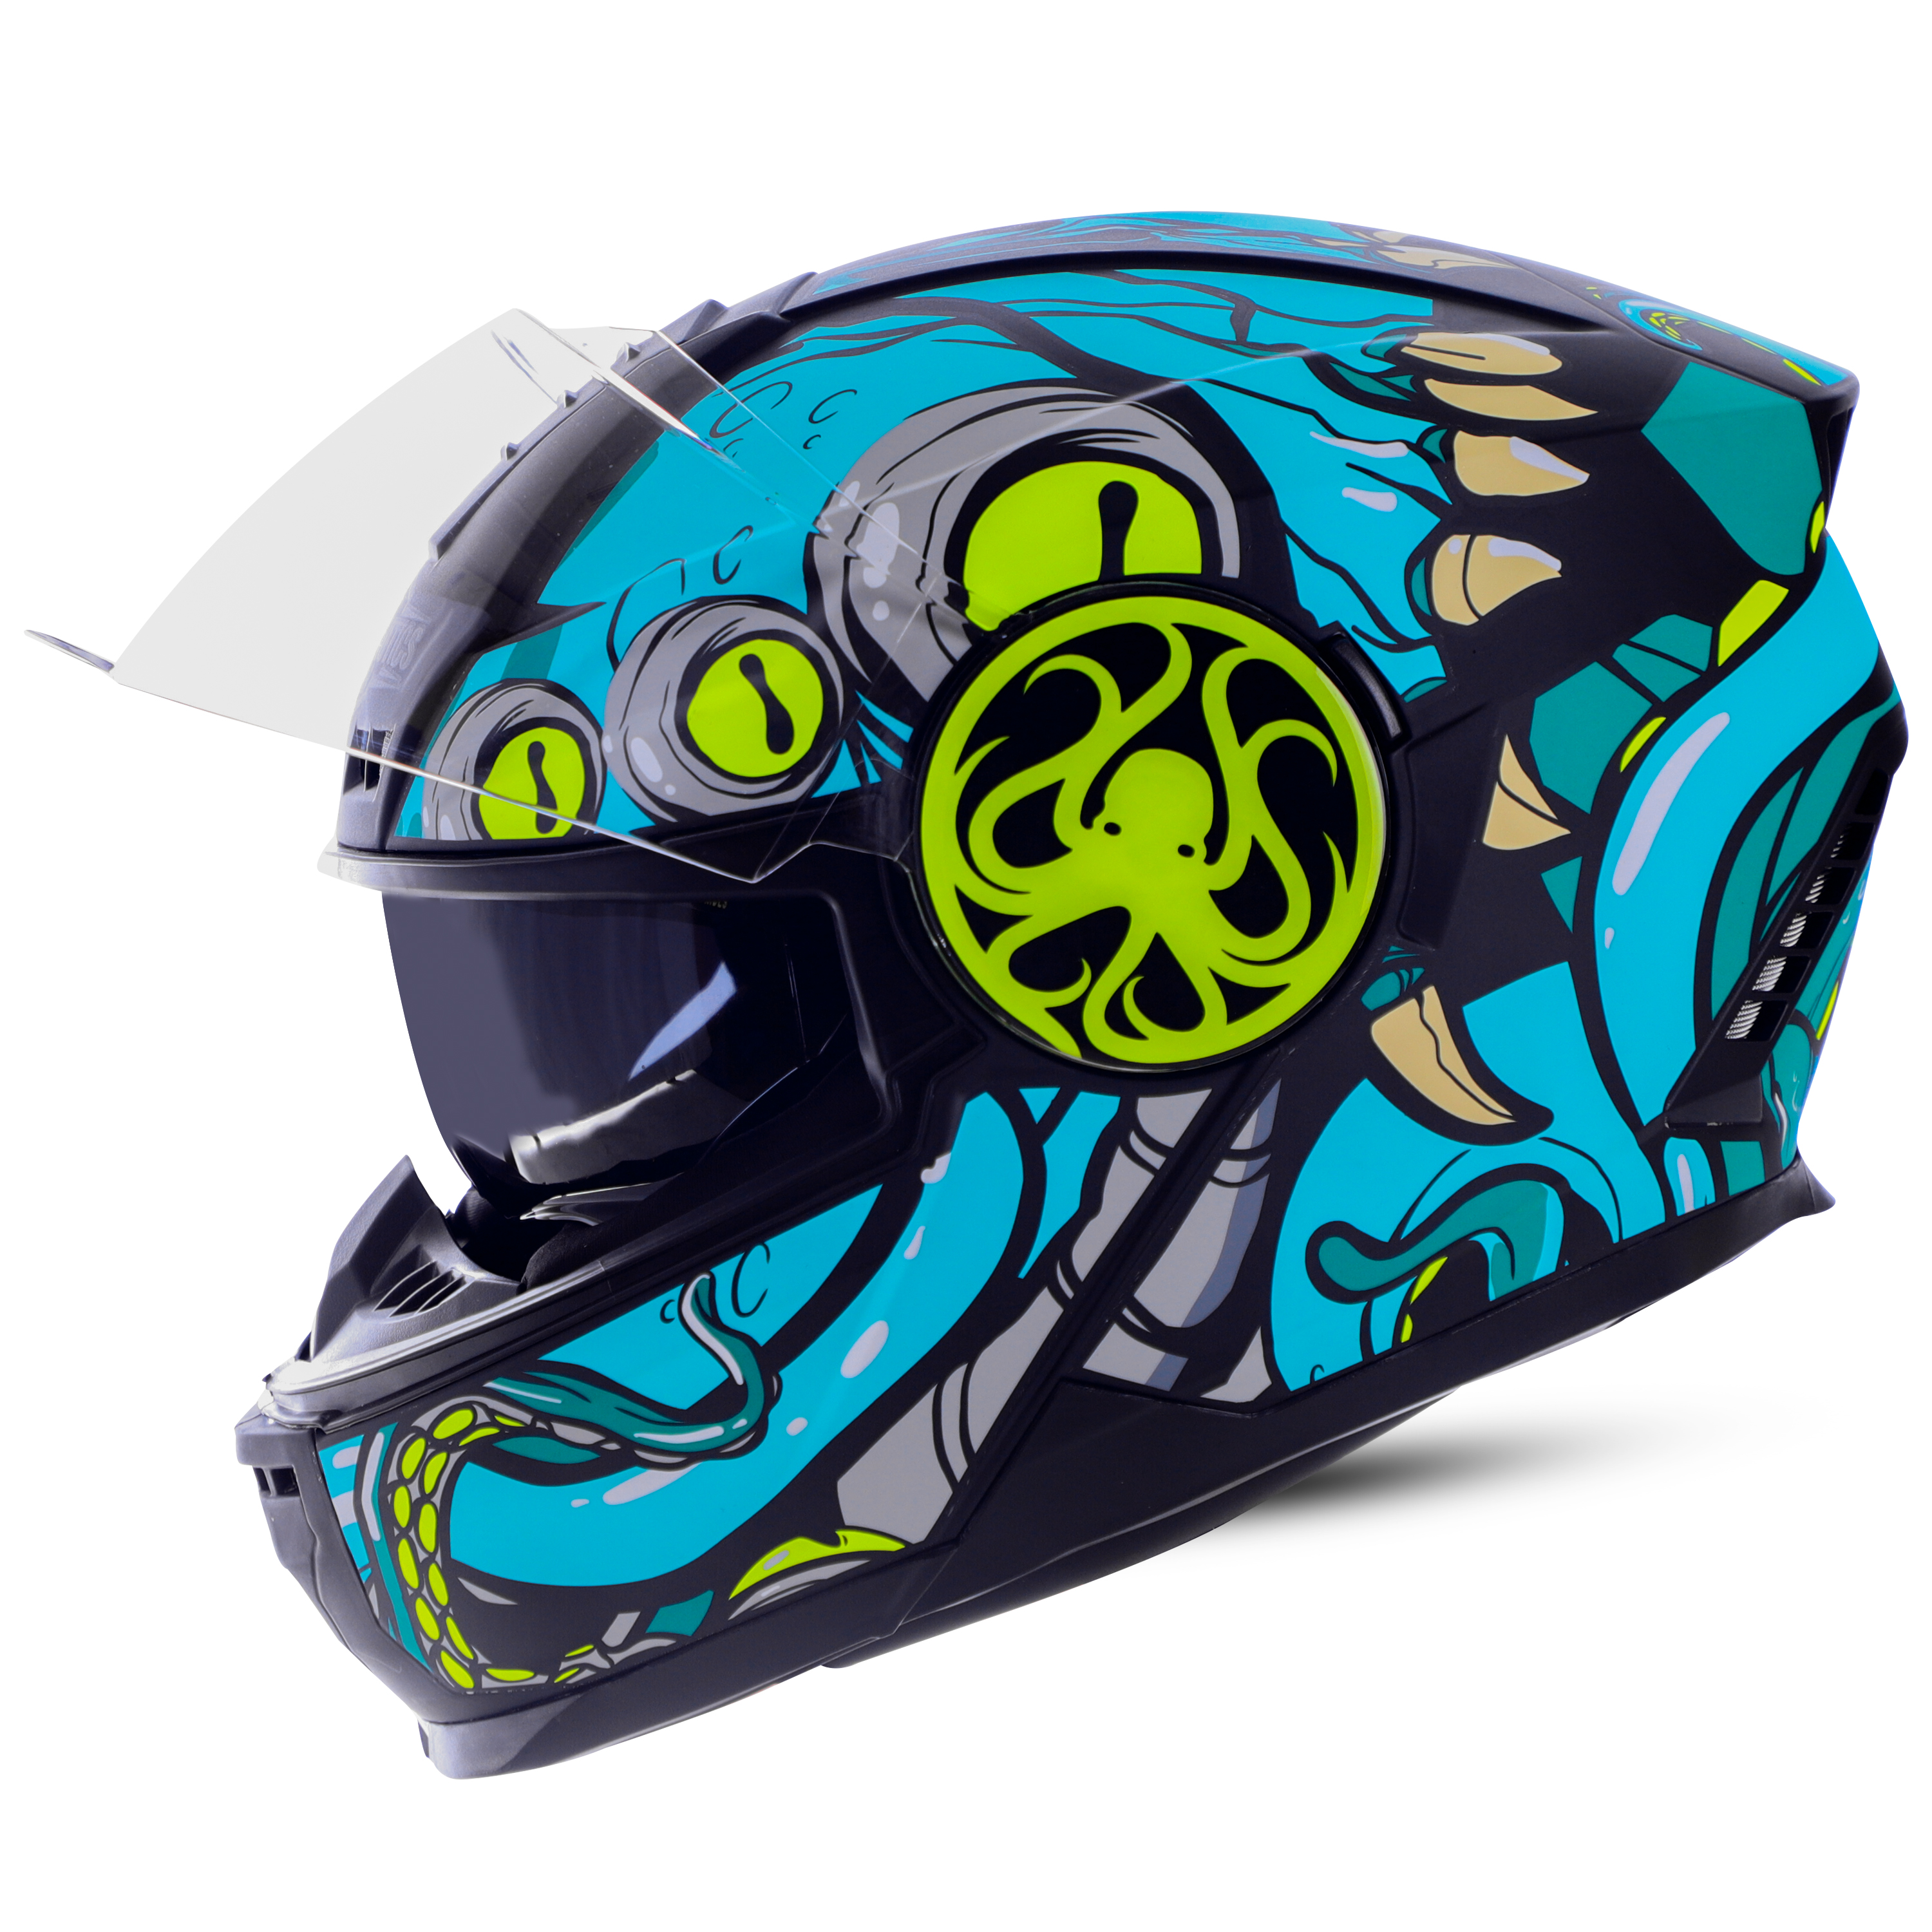 Steelbird SBH-40 Octopus ISI Certified Full Face Graphic Helmet for Men and Women with Inner Smoke Sun Shield (Glossy Black Sea Green)